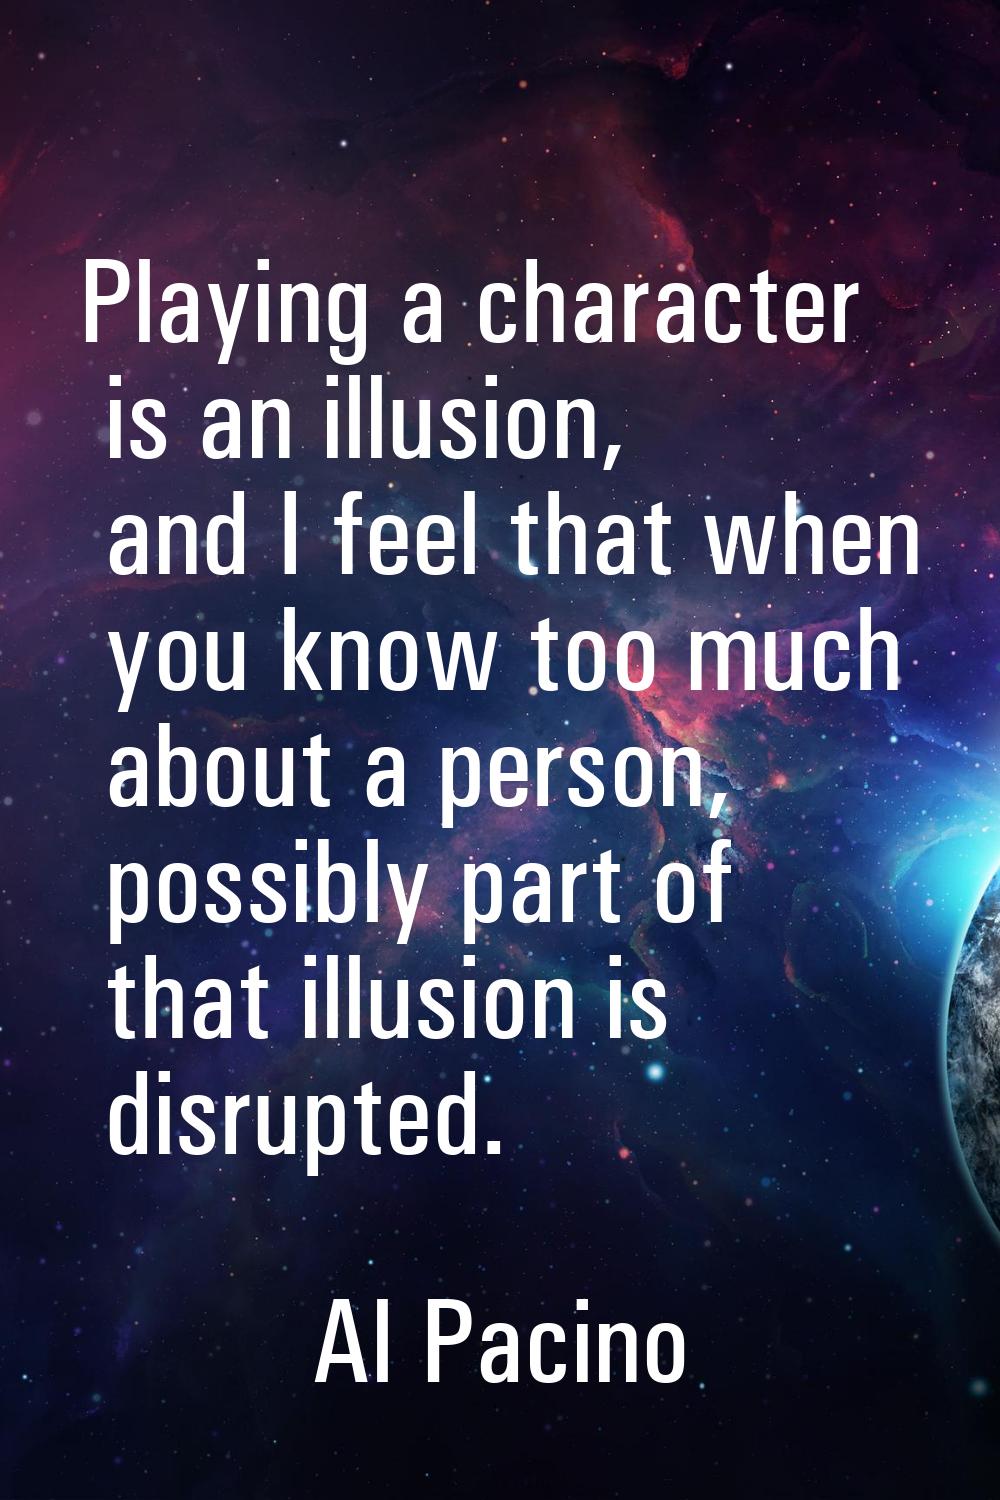 Playing a character is an illusion, and I feel that when you know too much about a person, possibly